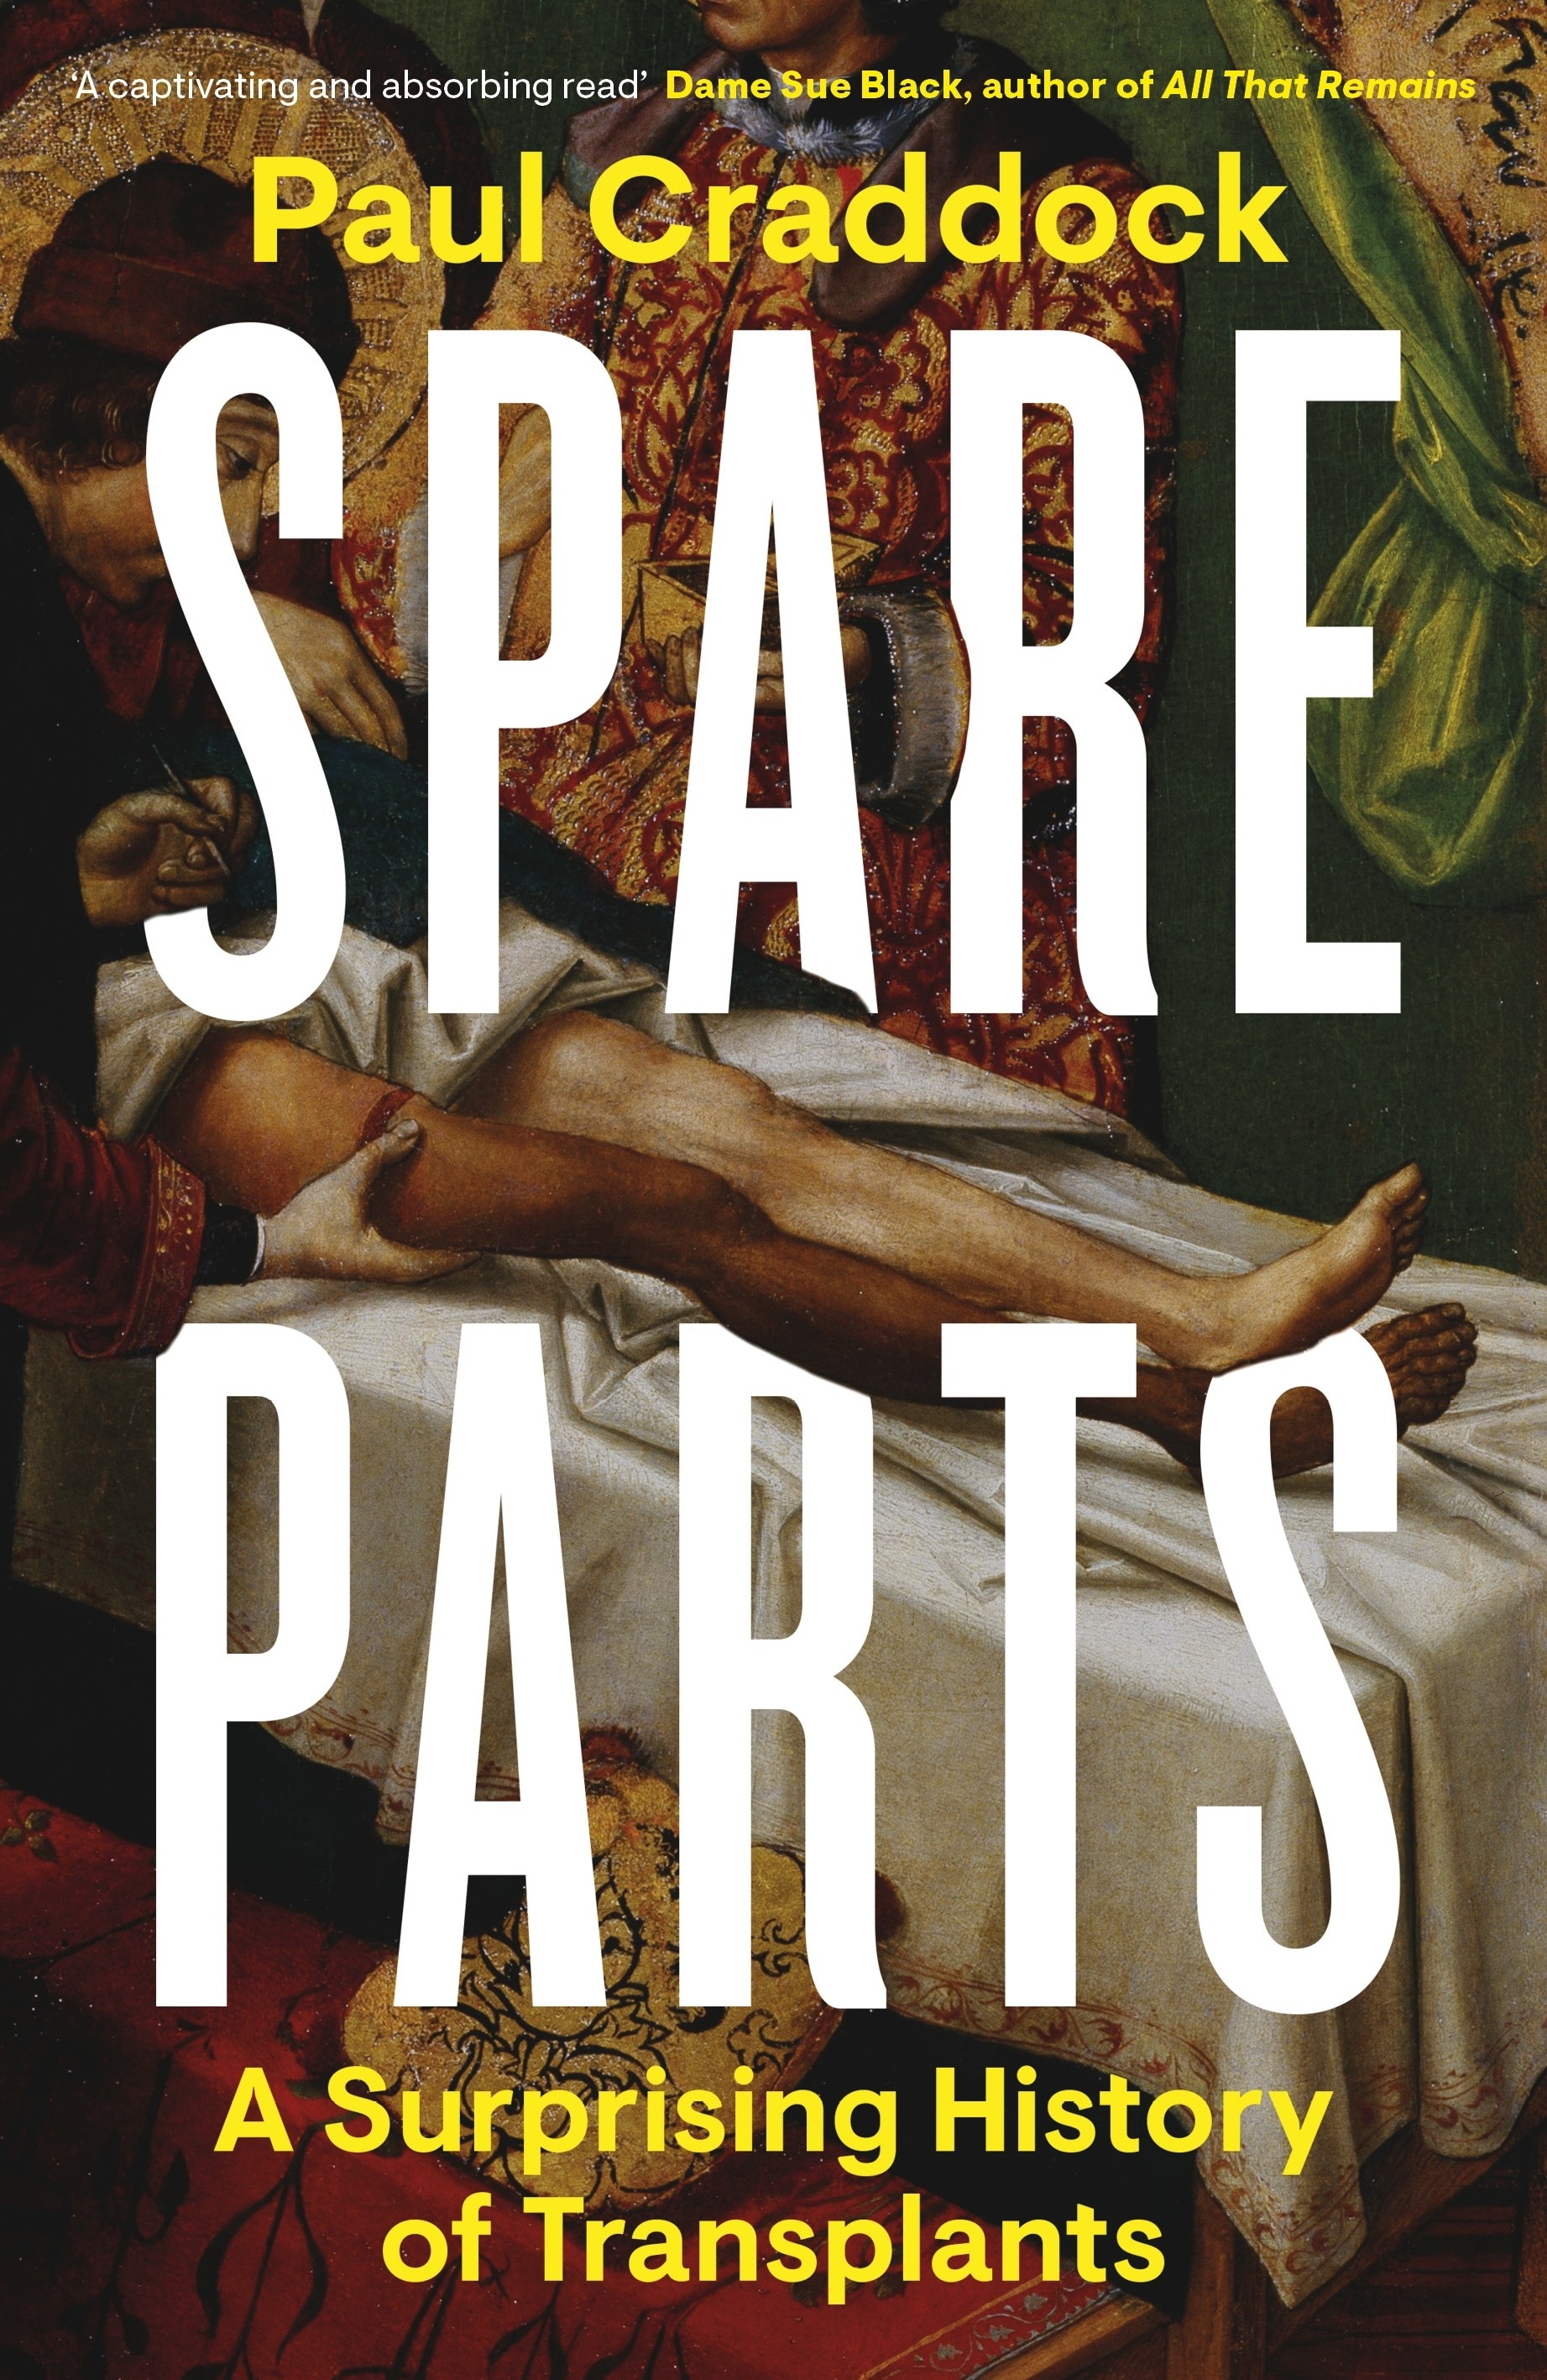 Book “Spare Parts” by Paul Craddock — August 26, 2021